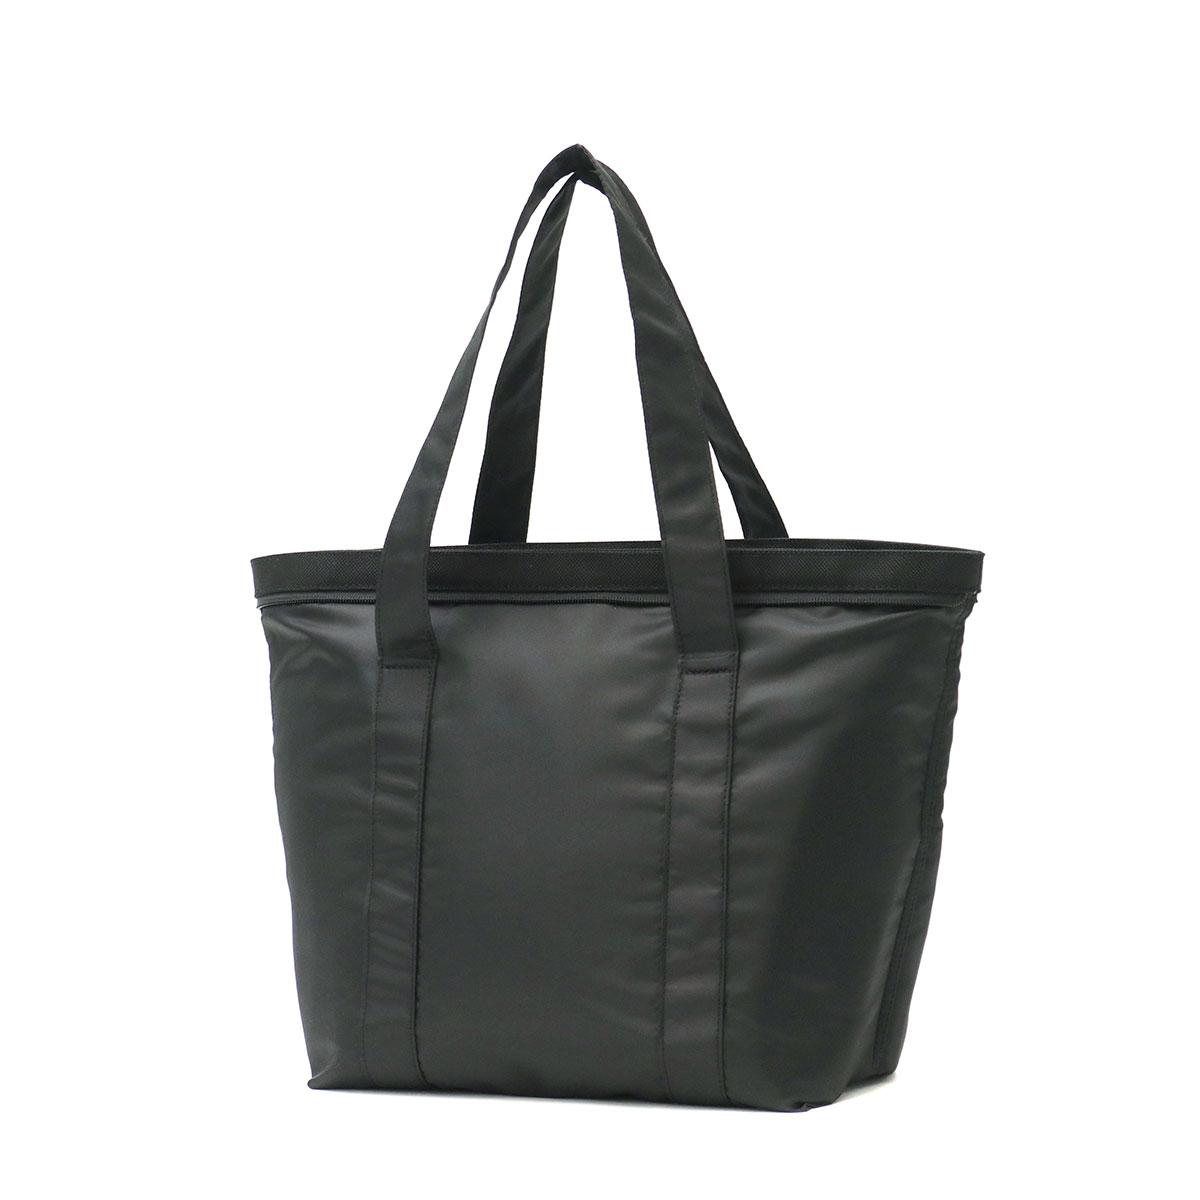 MAKAVELIC マキャベリック X-DESIGN LIMITED ETERNITY TOTE BAG 3121 